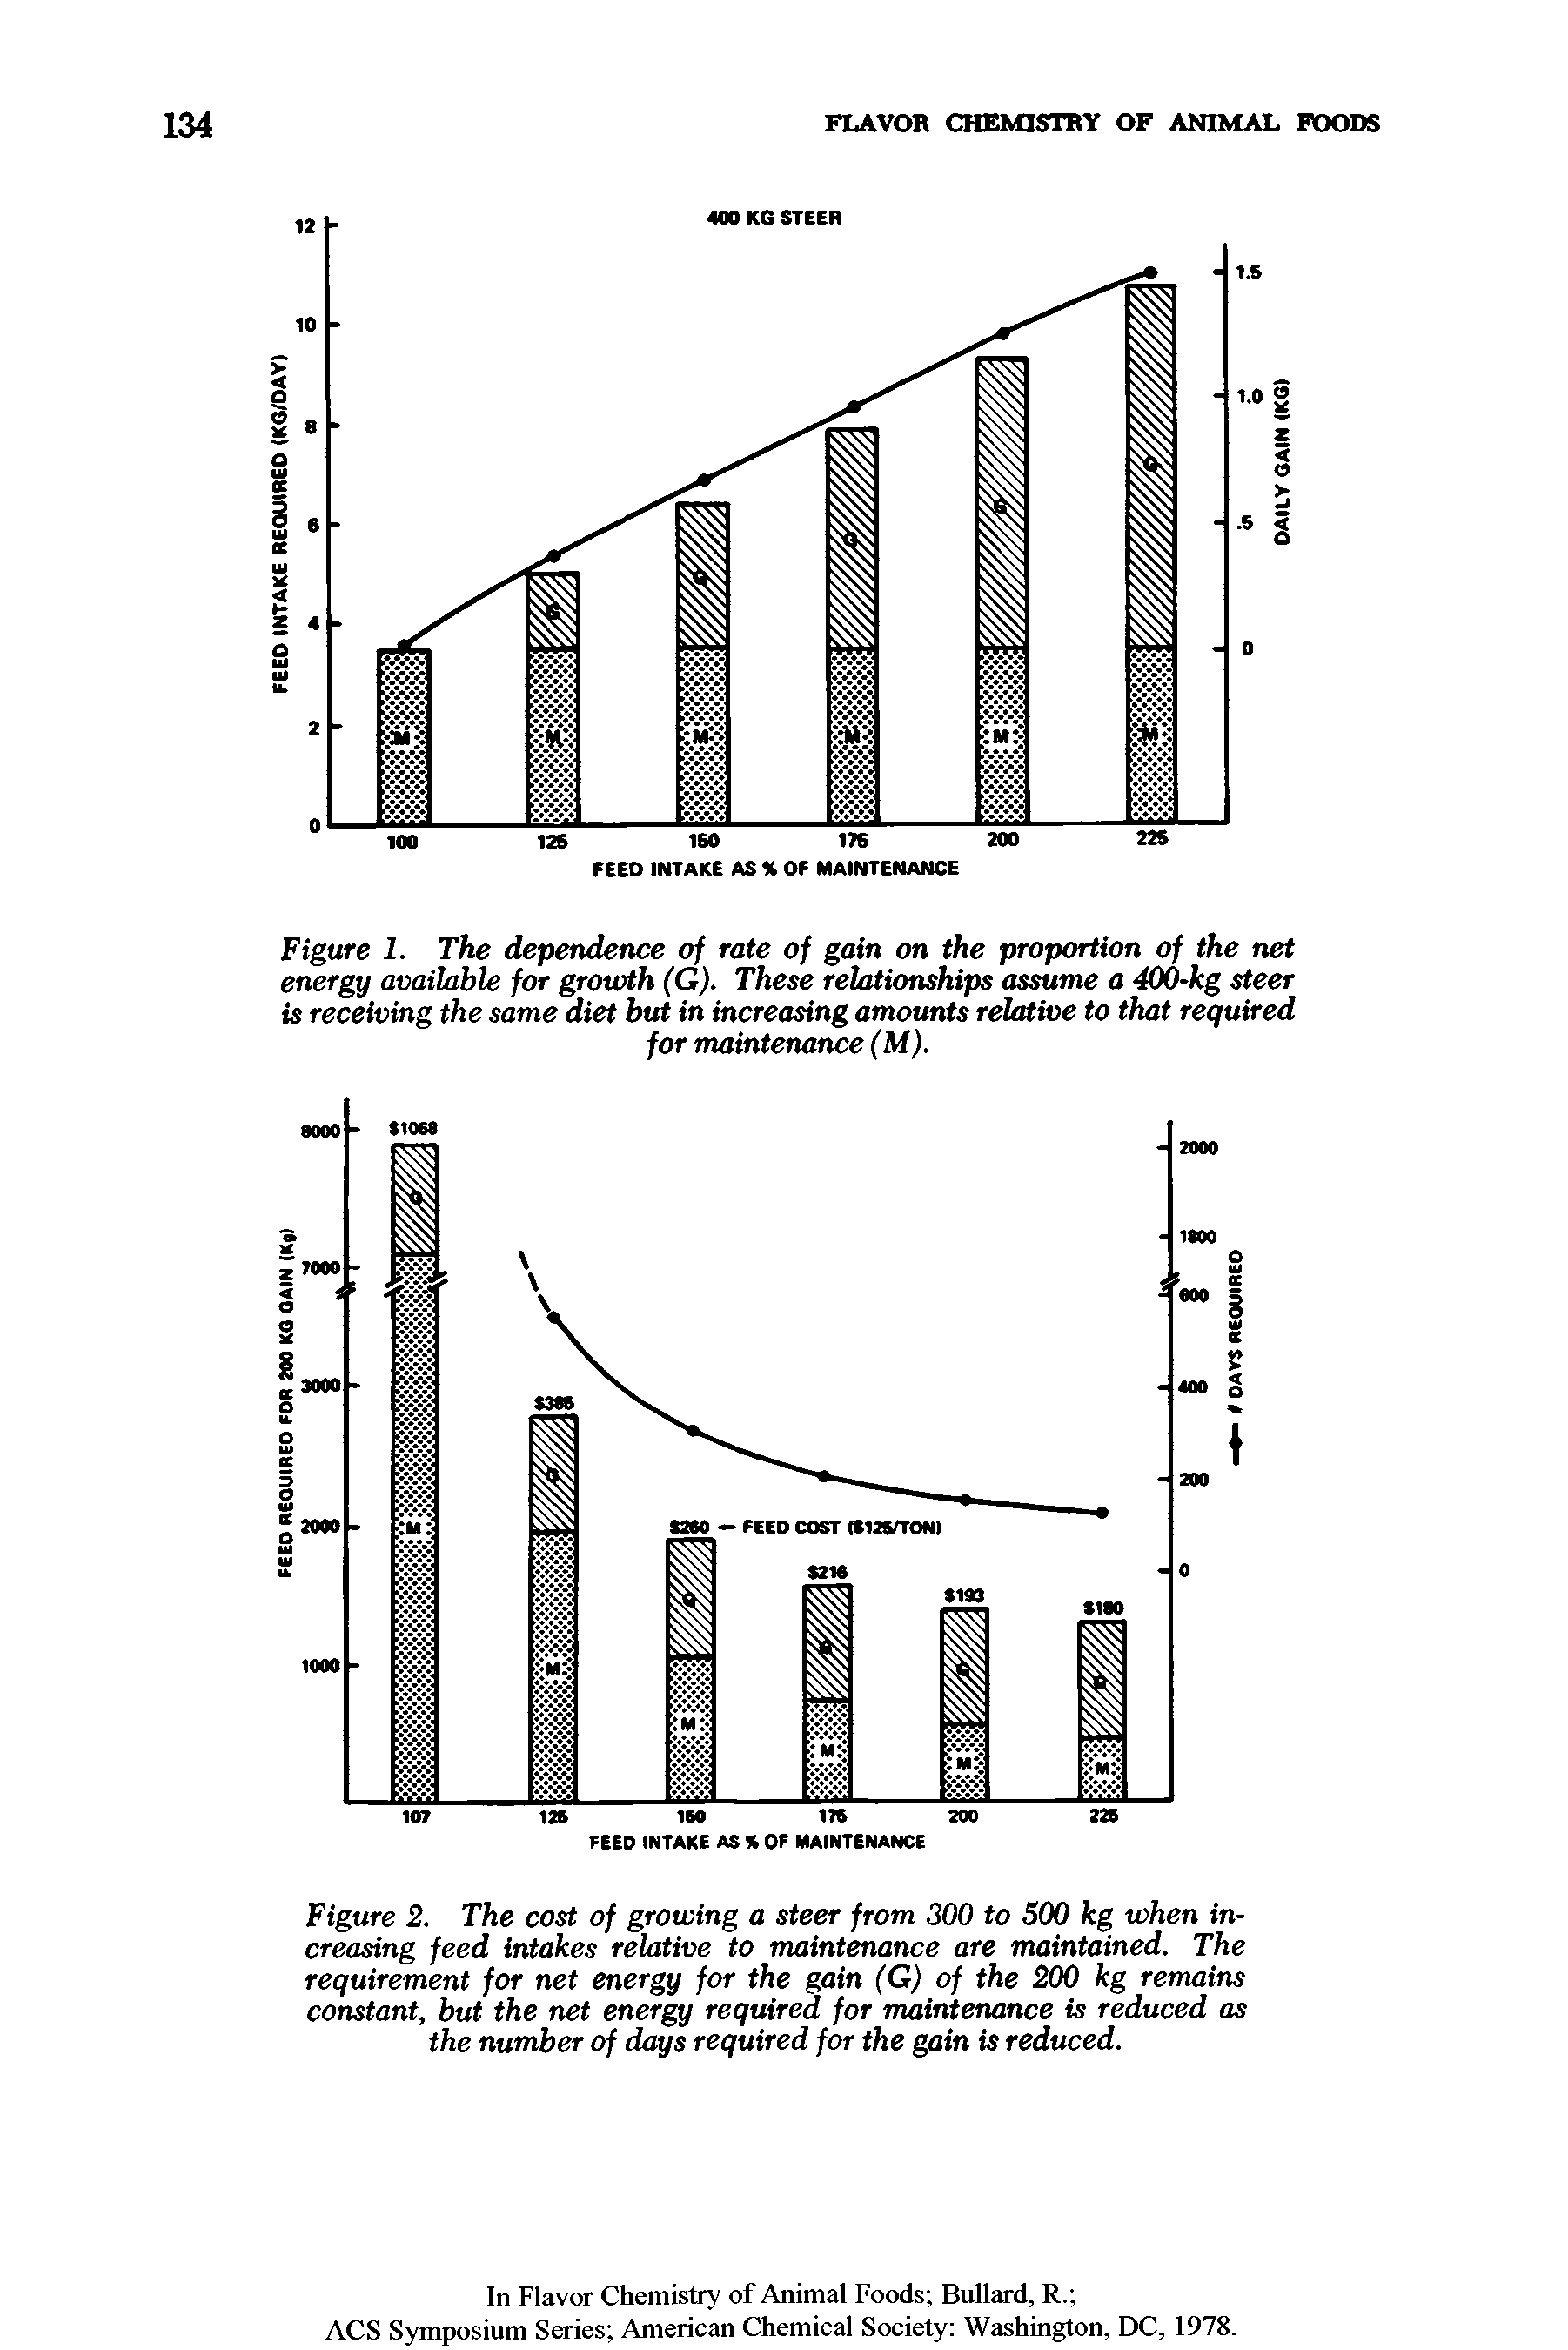 Figure 2. The cost of growing a steer from 300 to 500 kg when increasing feed intakes relative to maintenance are maintained. The requirement for net energy for the gain (G) of the 200 kg remains constant, but the net energy required for ntairitenance is reduced as the number of days required for the gain is reduced.